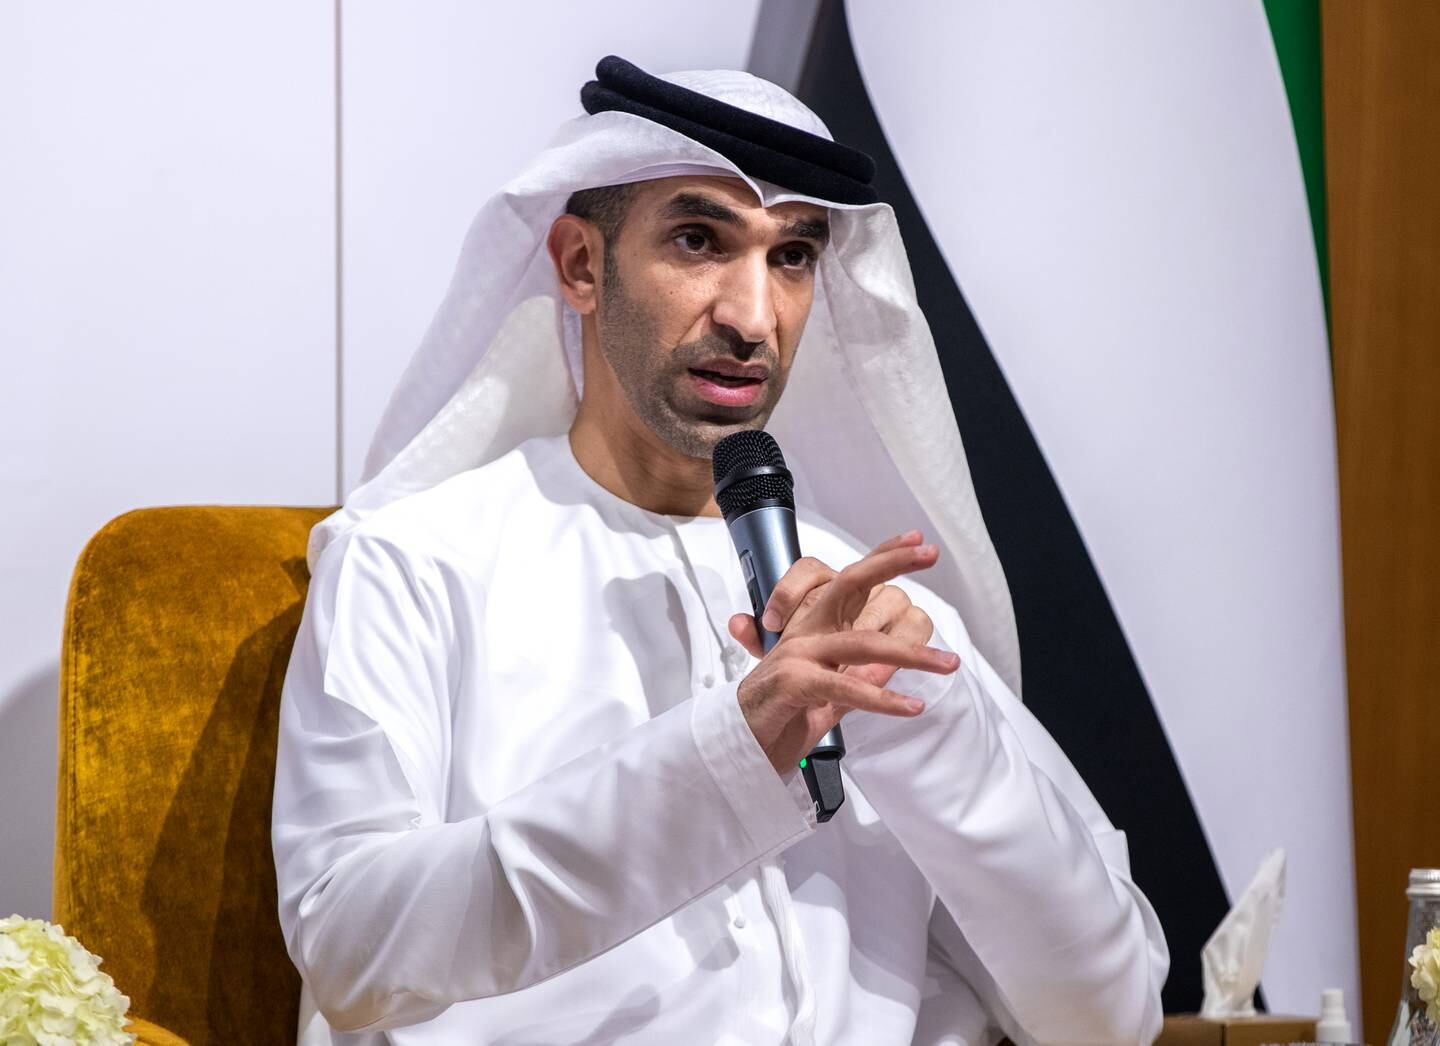 Dr Thani Al Zeyoudi, Minister of State for Foreign Trade, during the press conference on the UAE-Indonesia Comprehensive Economic Partnership Agreement. Victor Besa / The National